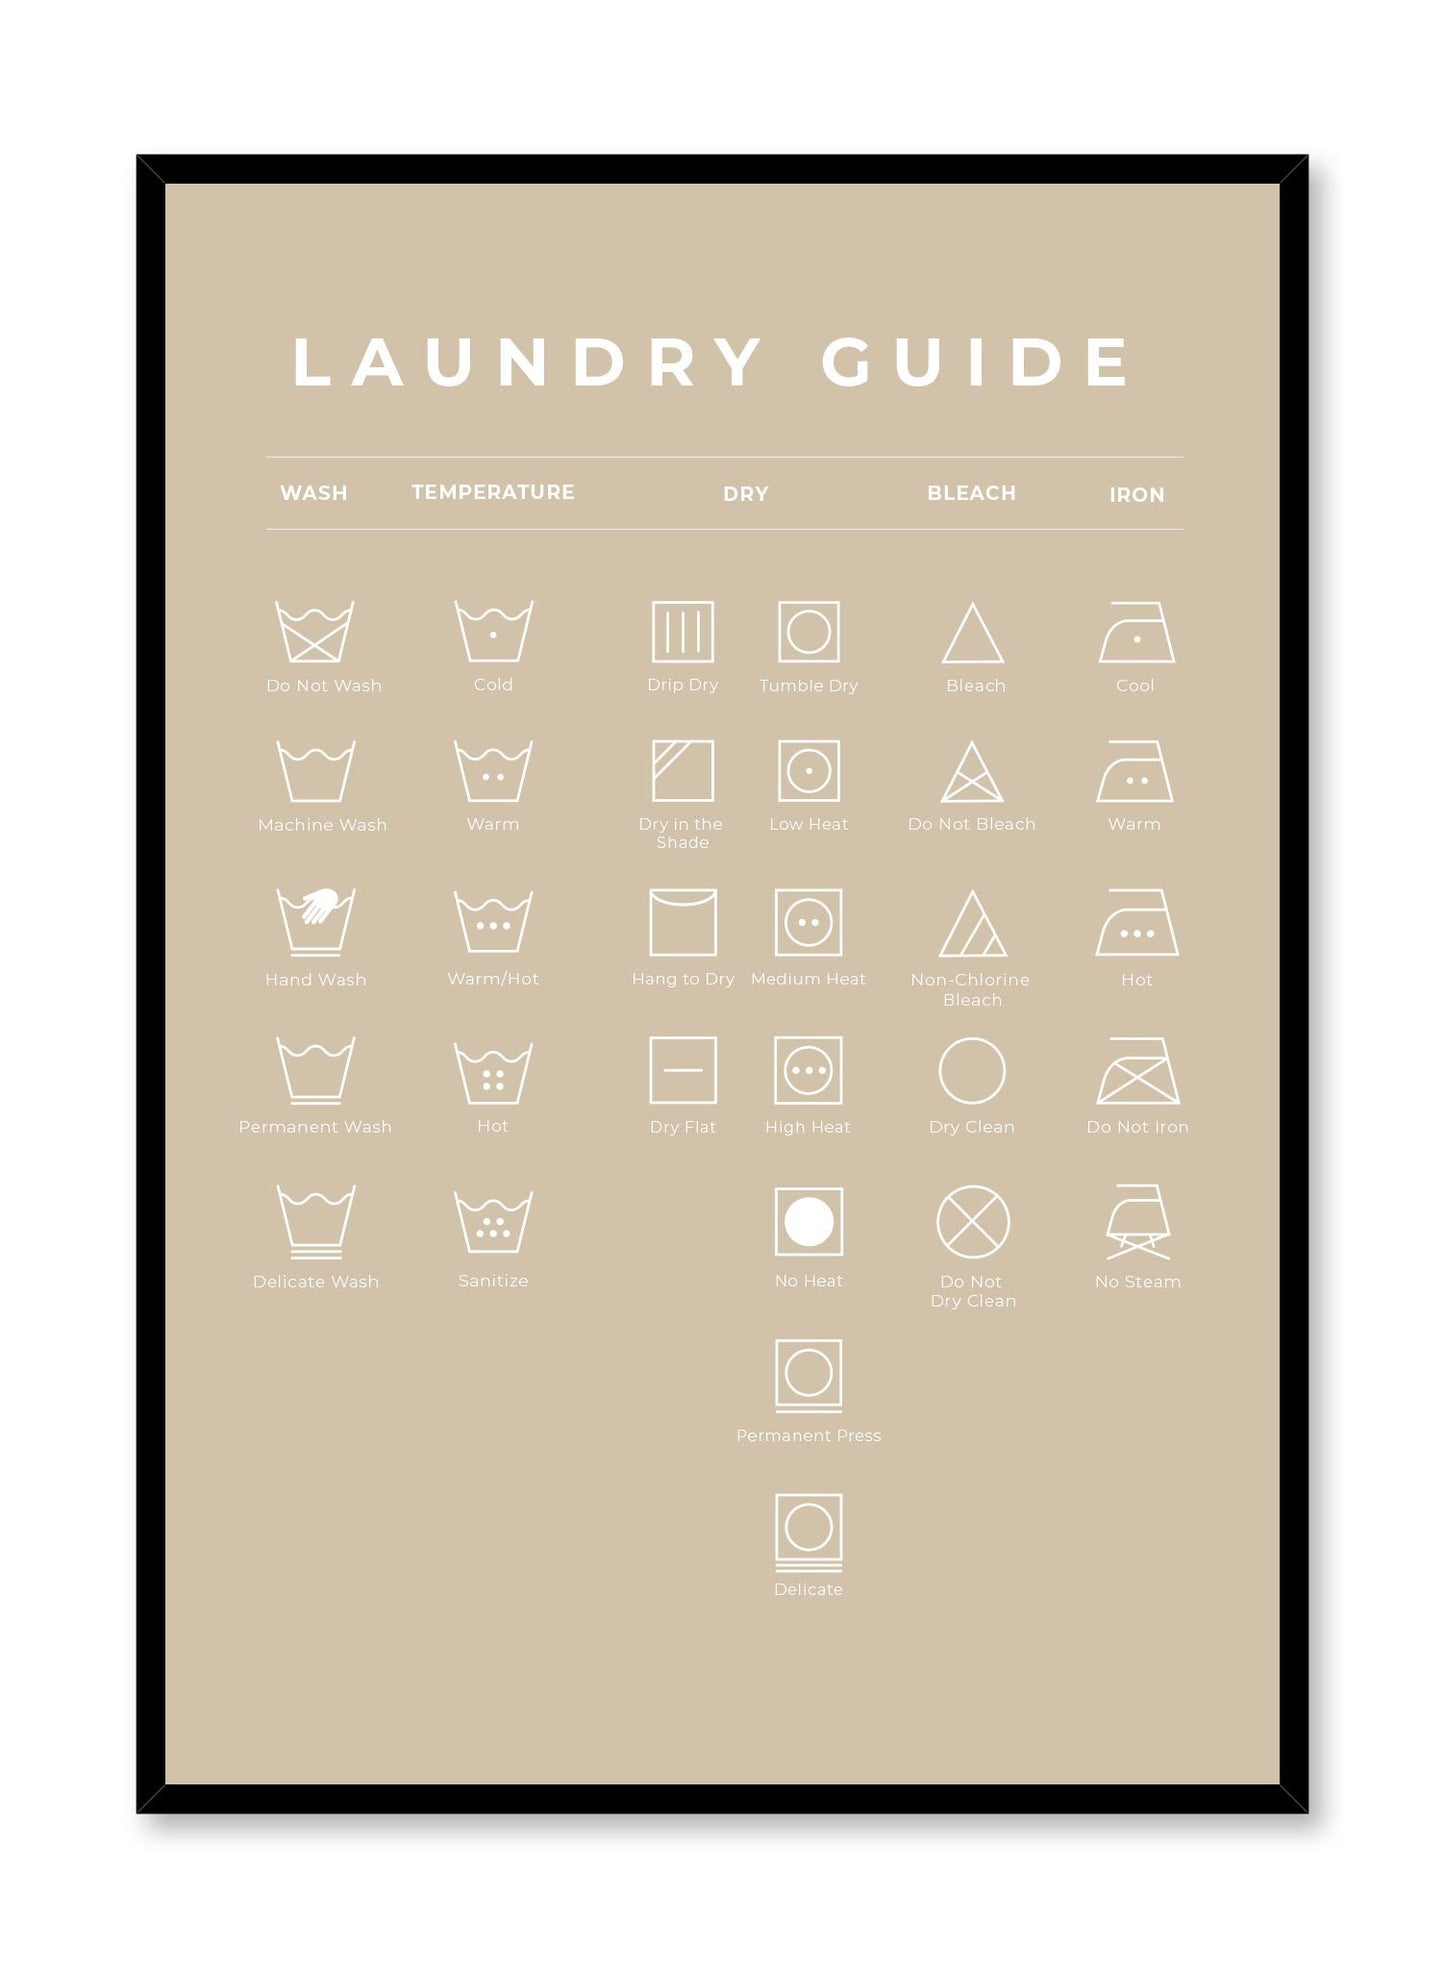 Laundry Guide in Beige is a minimalist typography by Opposite Wall of a chart of laundry symbols and their meaning.